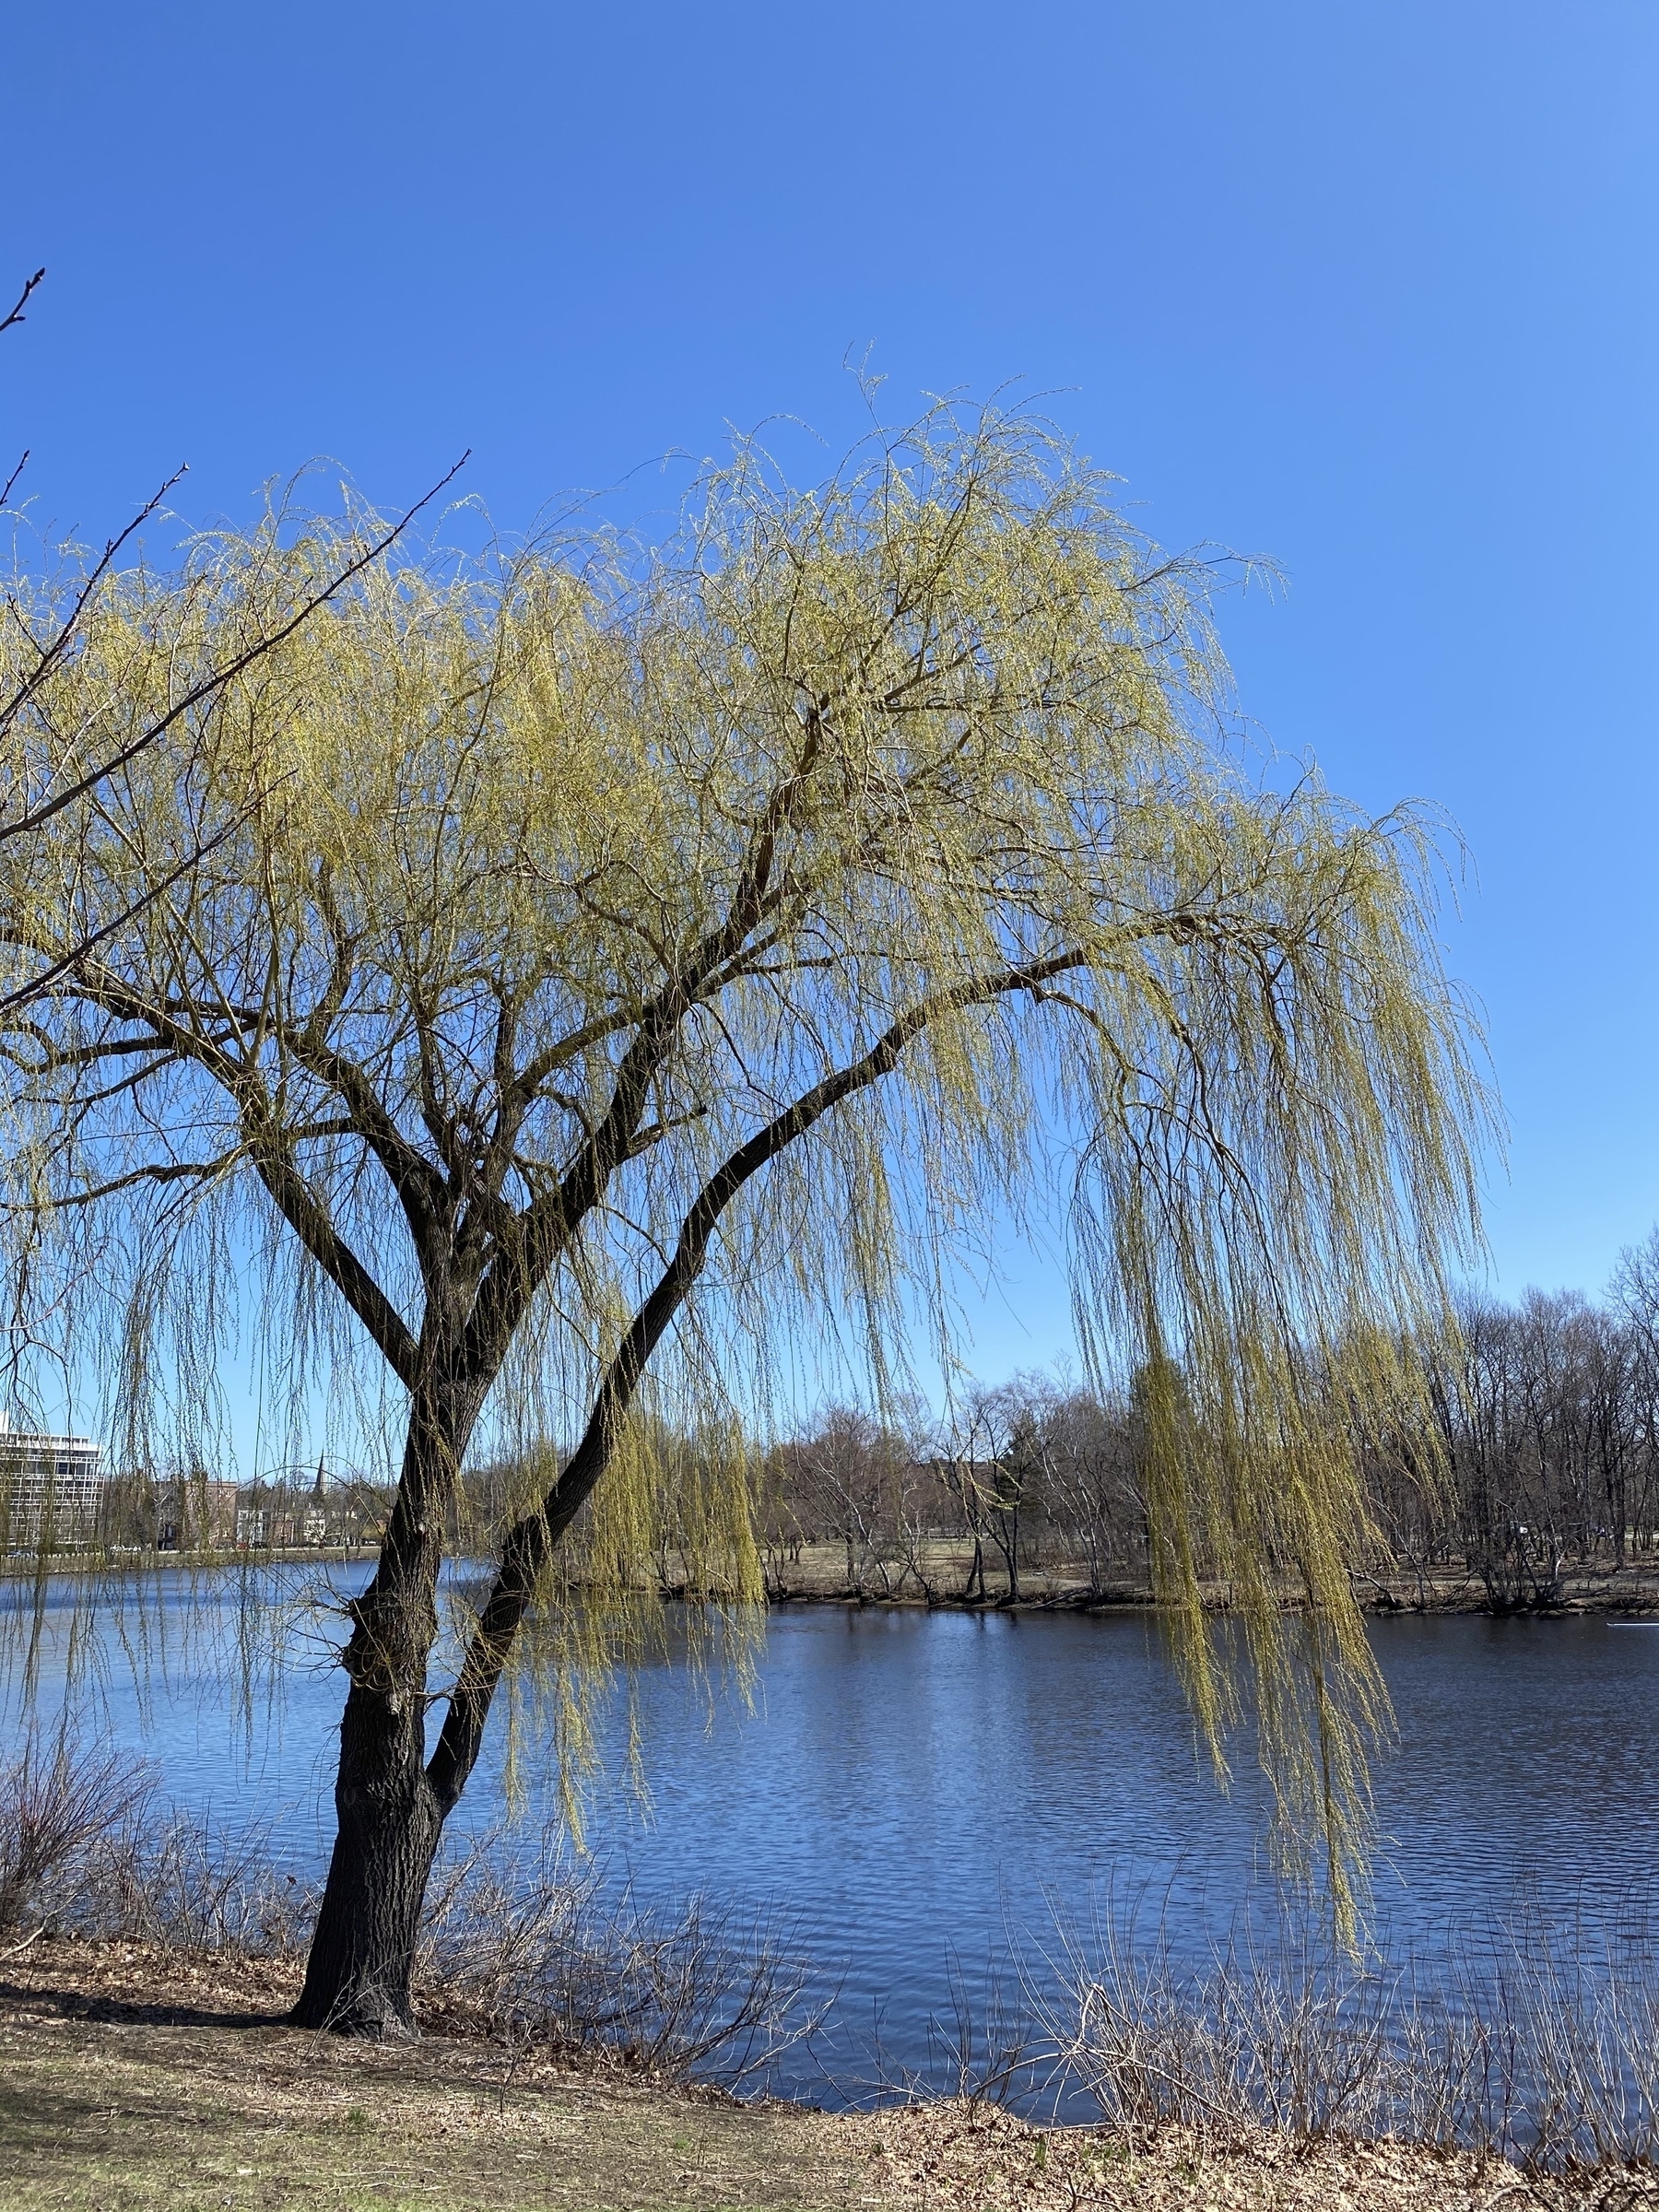 Willow tree with yellow sprouts by the side of a river.